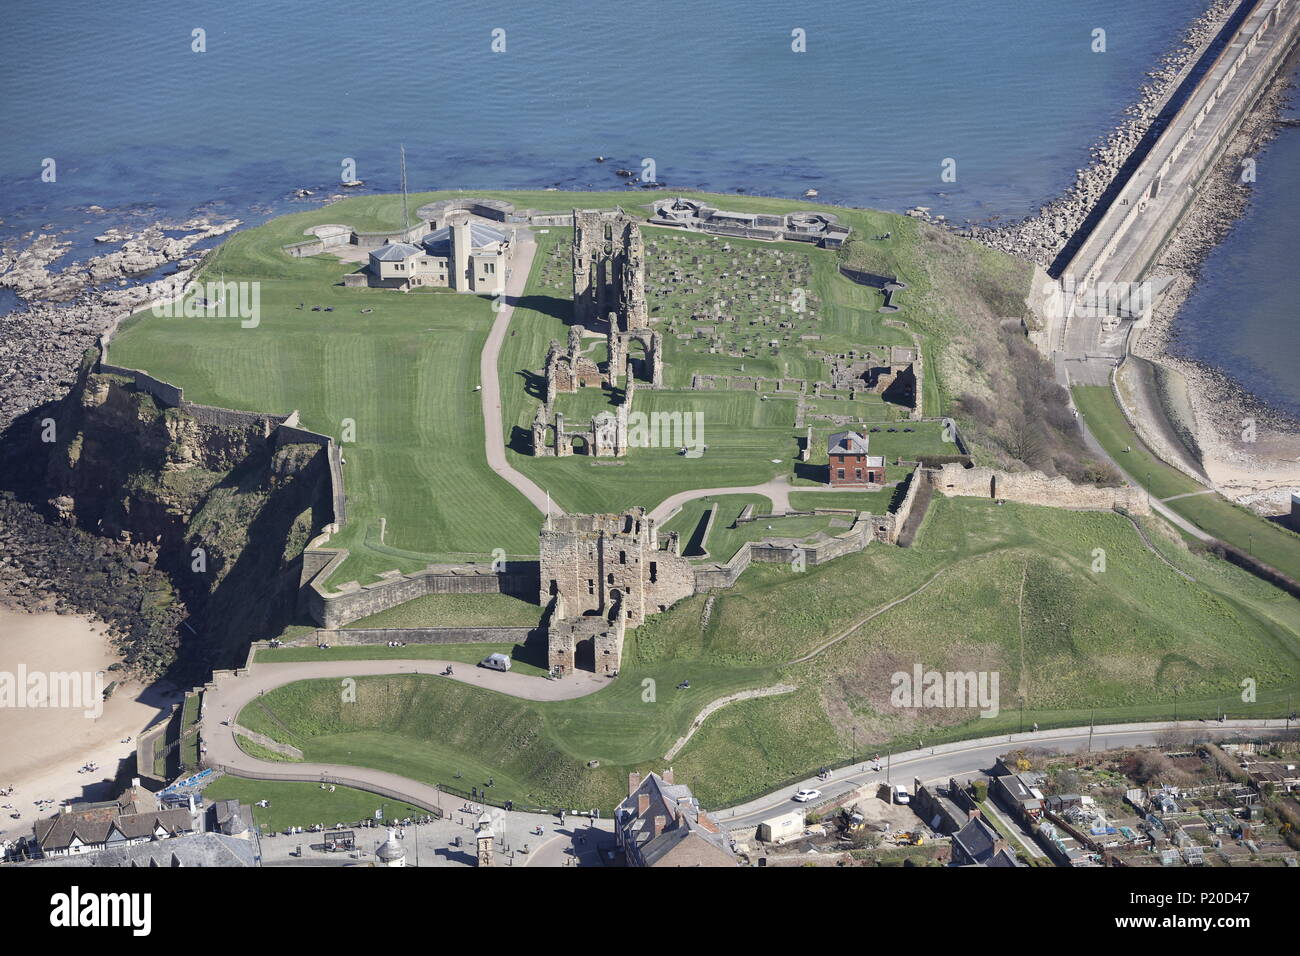 An aerial view of Tynemouth Castle and Priory, North East England. Stock Photo